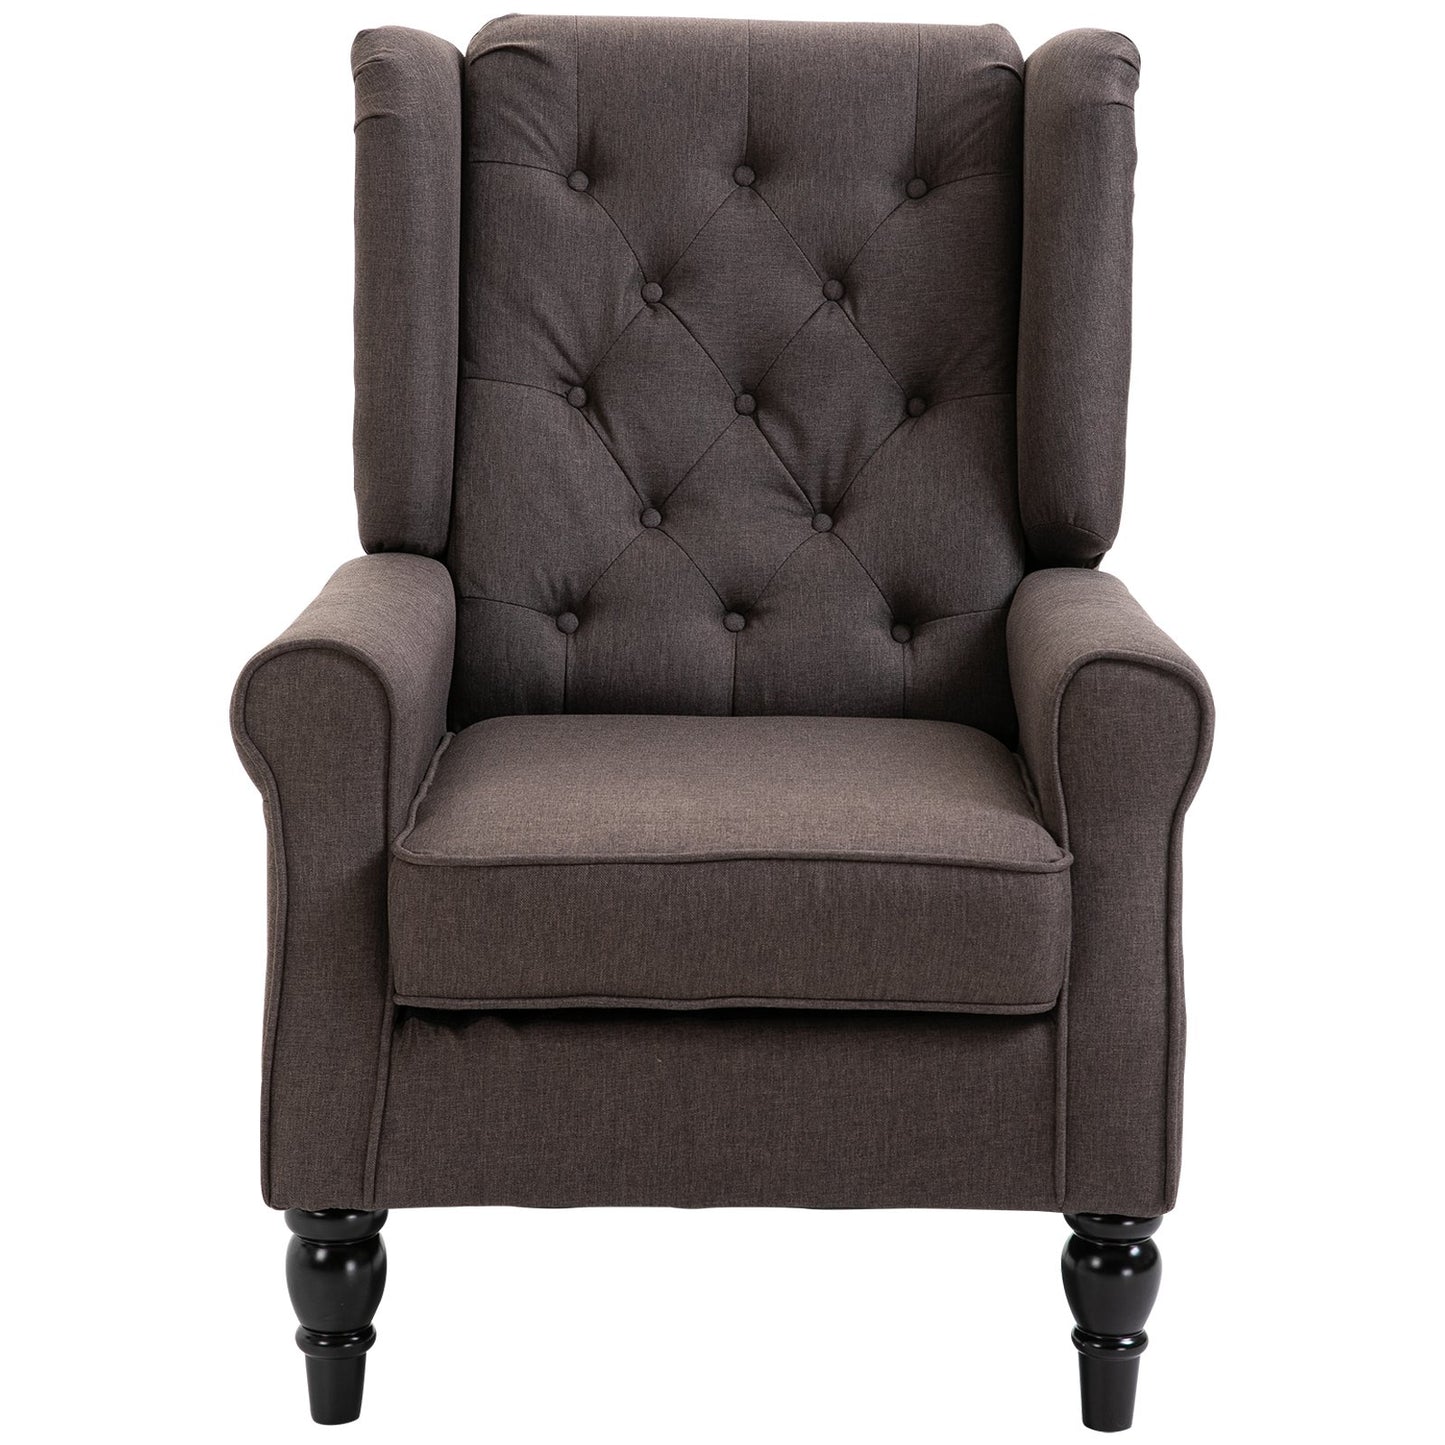 HOMCOM Fabric Tufted Accent Armchair Brown